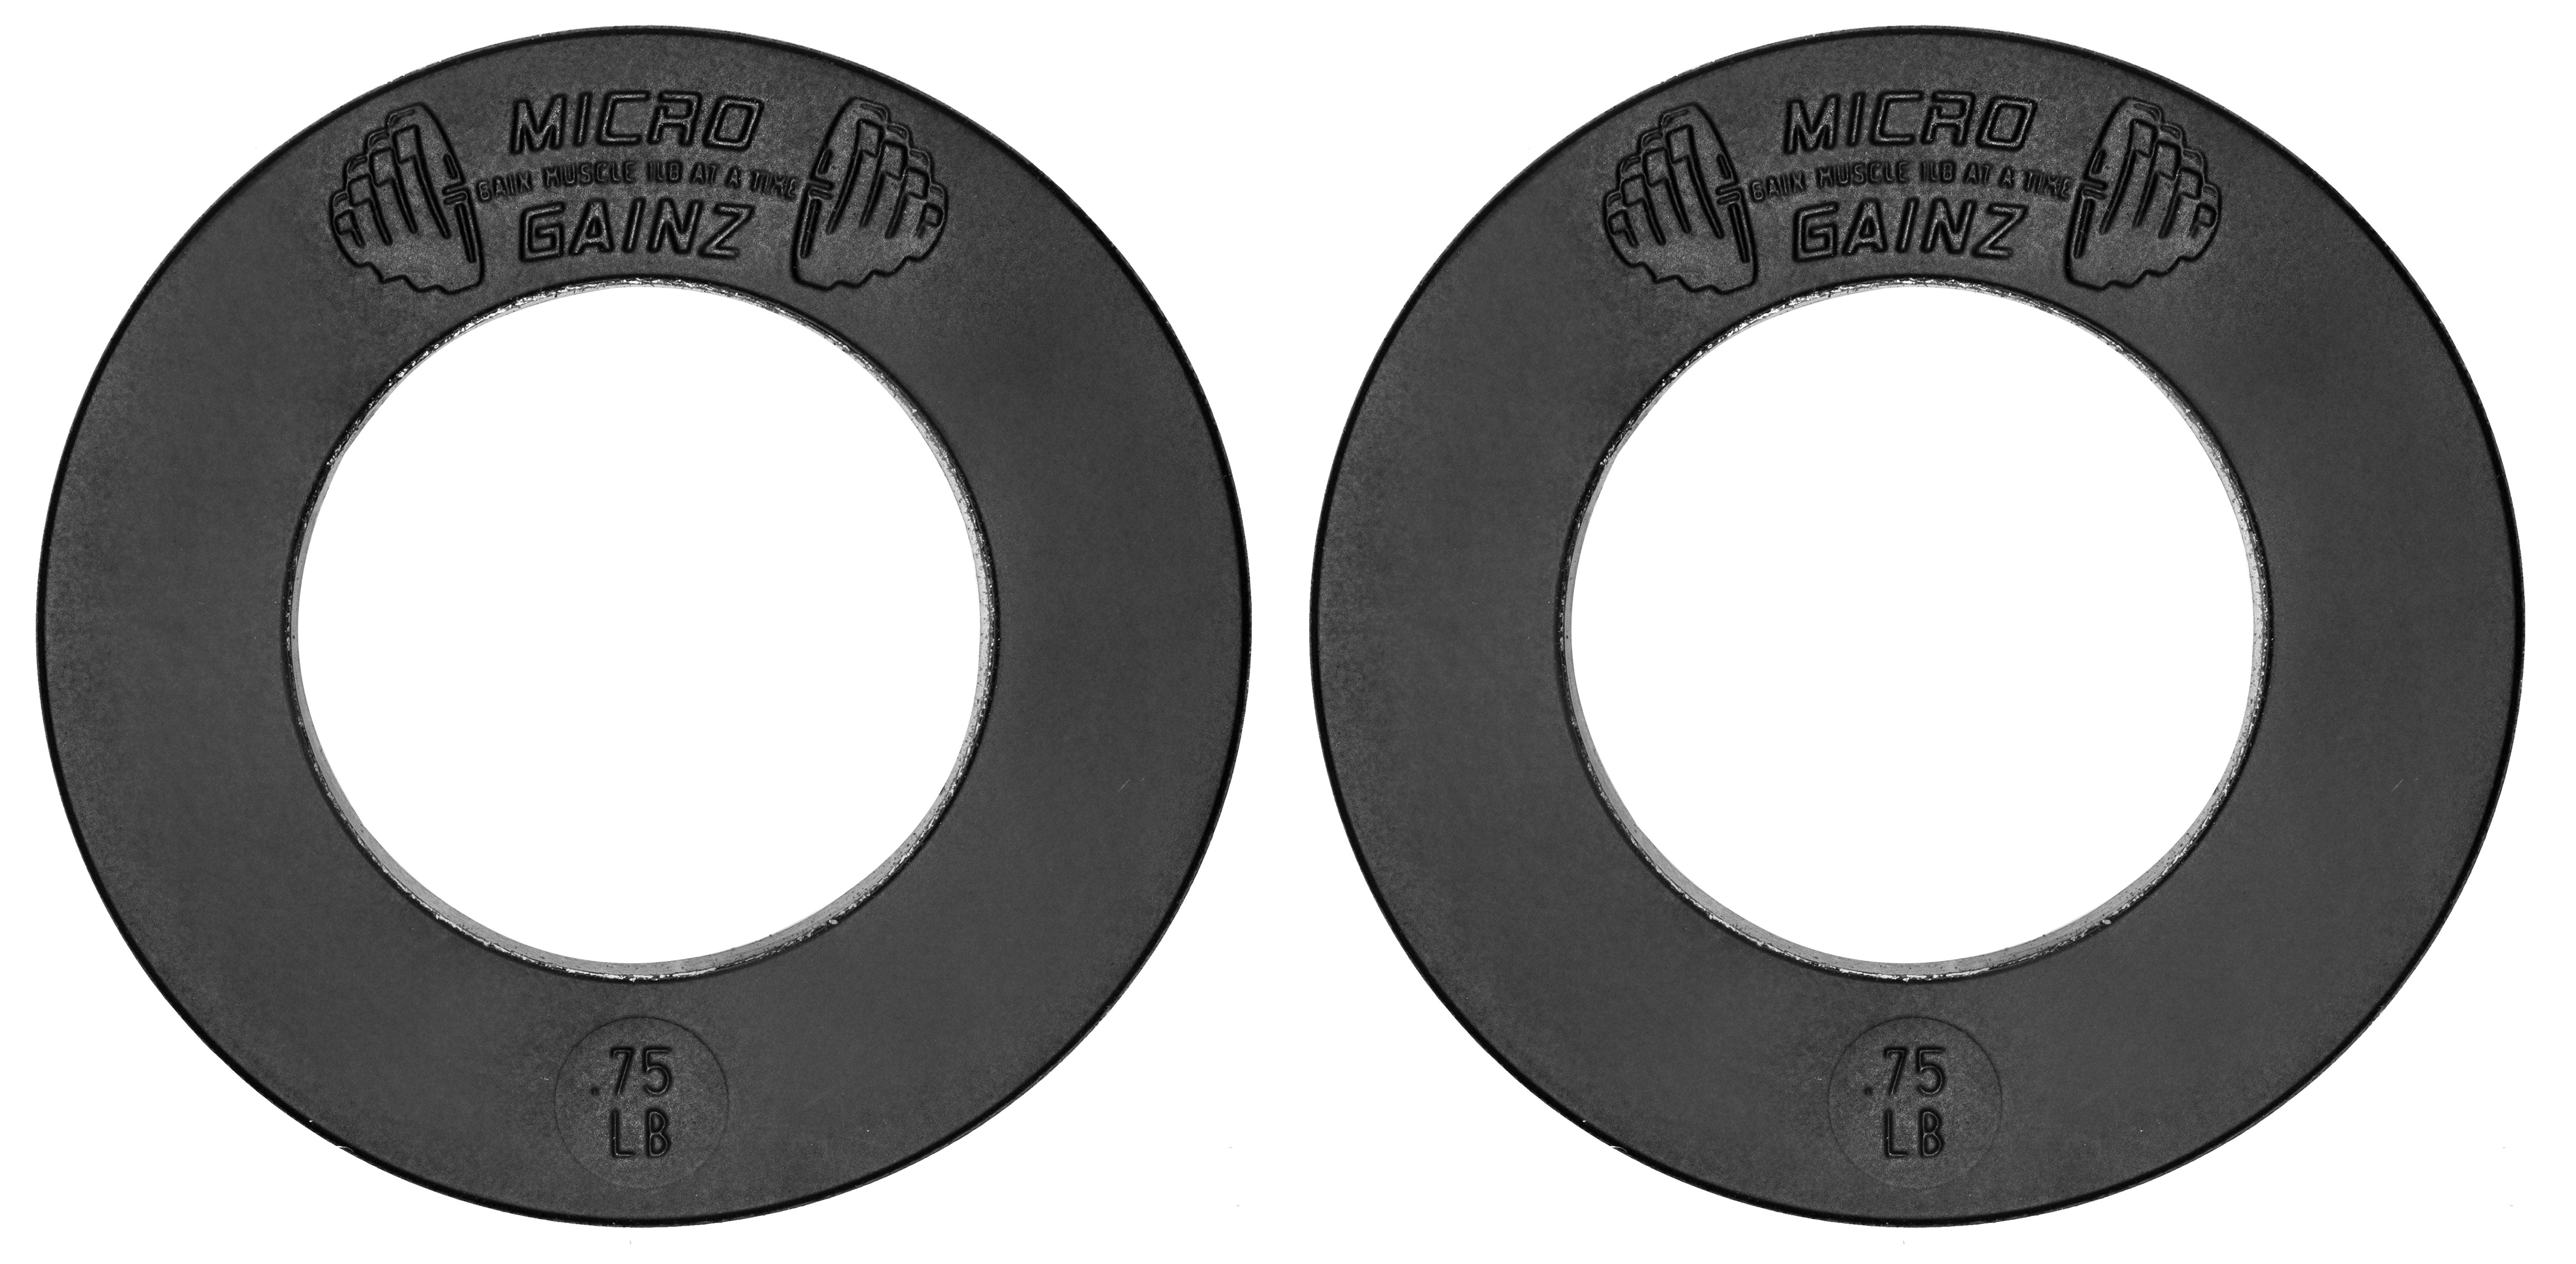 Micro Gainz Olympic Size Fractional Weight Plates Pair of .75LB Plates